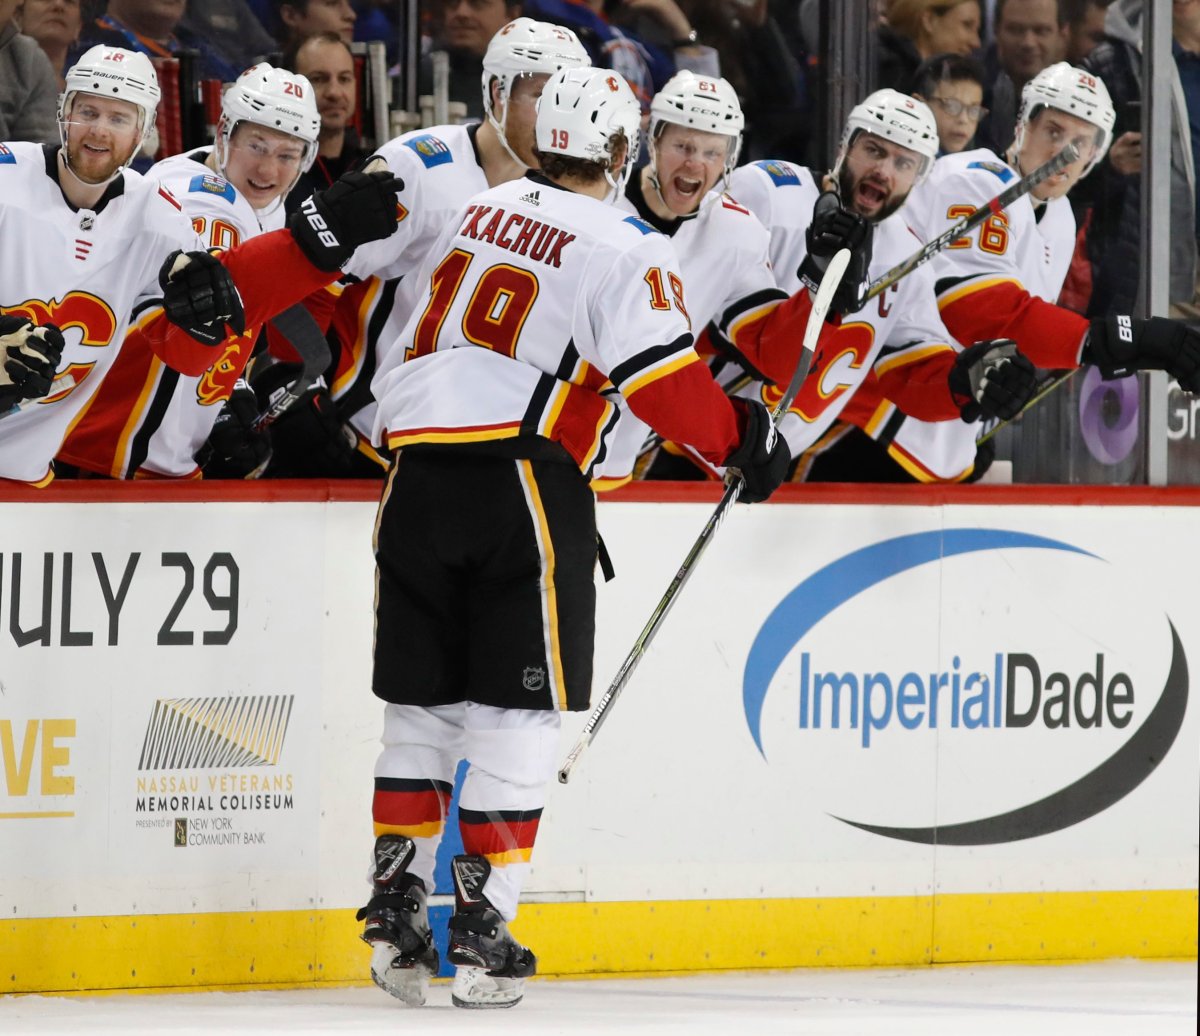 Teammates celebrate with Calgary Flames left wing Matthew Tkachuk (19) who scored two goals in the third period of an NHL hockey game against the New York Islanders in New York, Sunday, Feb. 11, 2018. The Flames defeated the Islanders 3-2 on Tkachuk's game-winning goal. (AP Photo/Kathy Willens).